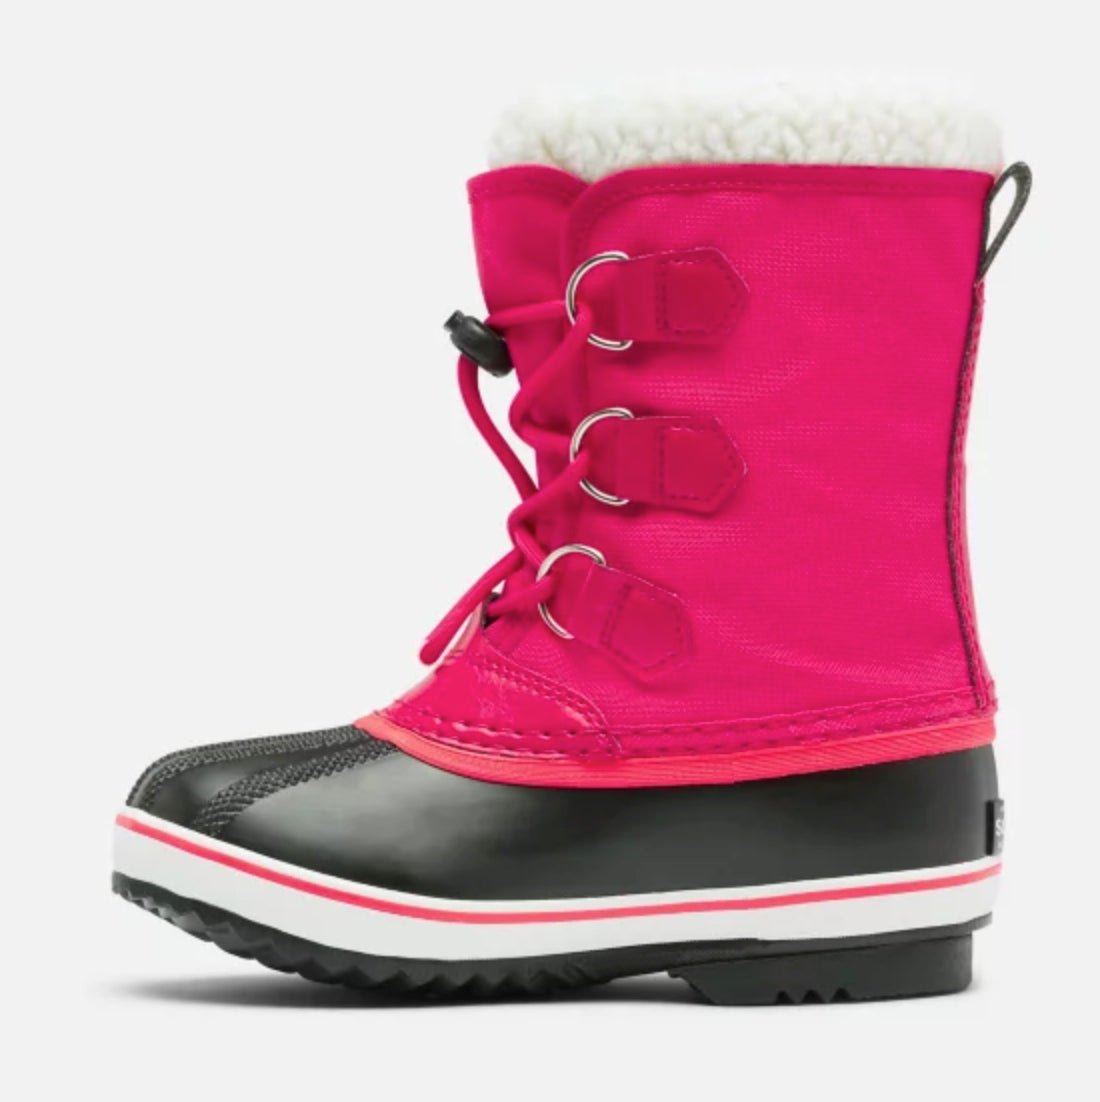 Sorel Youth Yoot Pac Nylon Winter Boots - Mountain Kids Outfitters in Uniform Pink on a white background side view